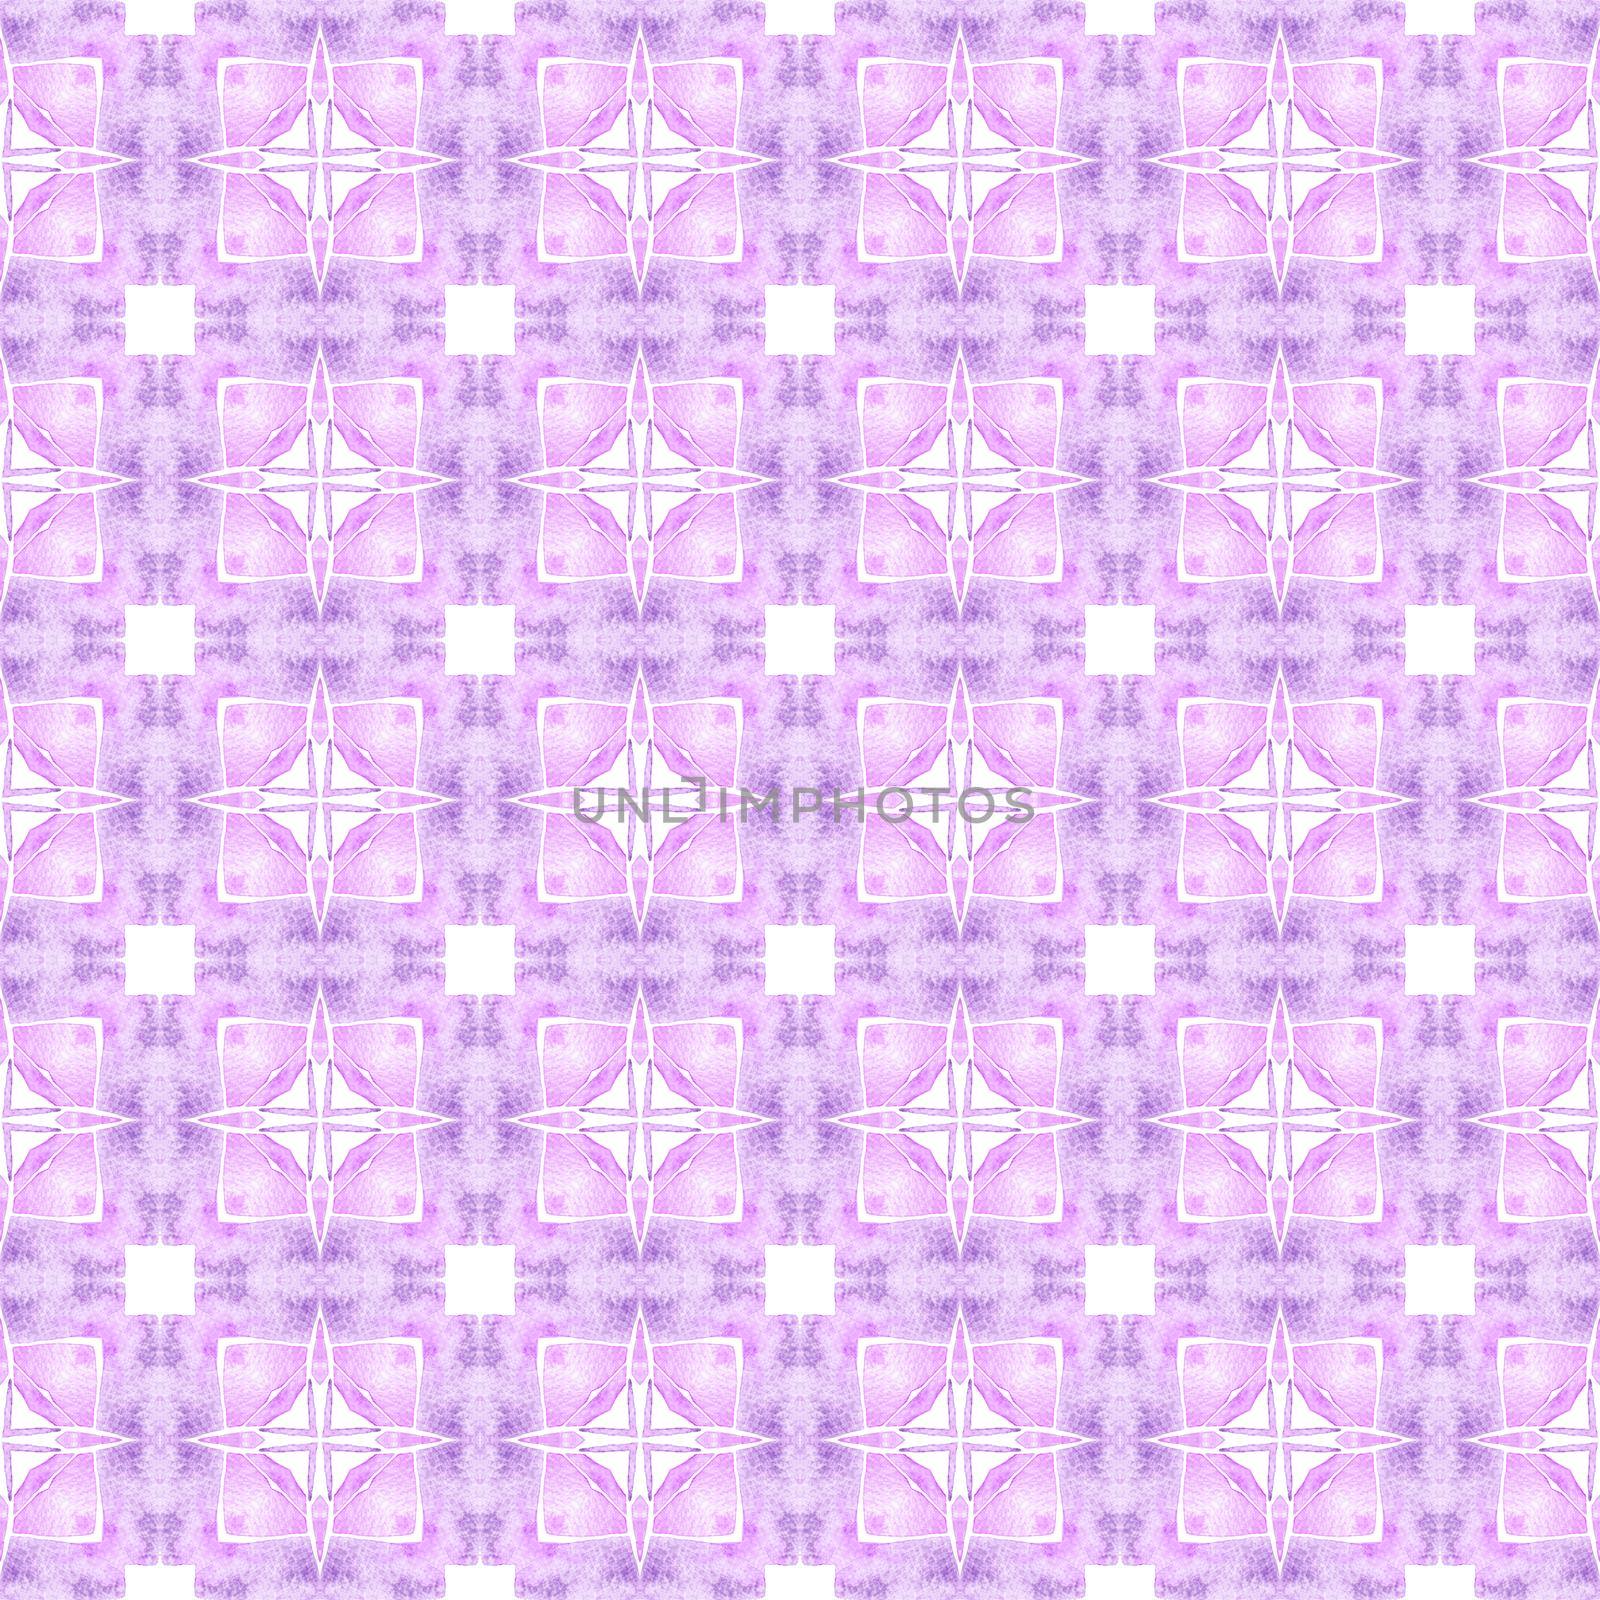 Exotic seamless pattern. Purple admirable boho chic summer design. Textile ready superb print, swimwear fabric, wallpaper, wrapping. Summer exotic seamless border.